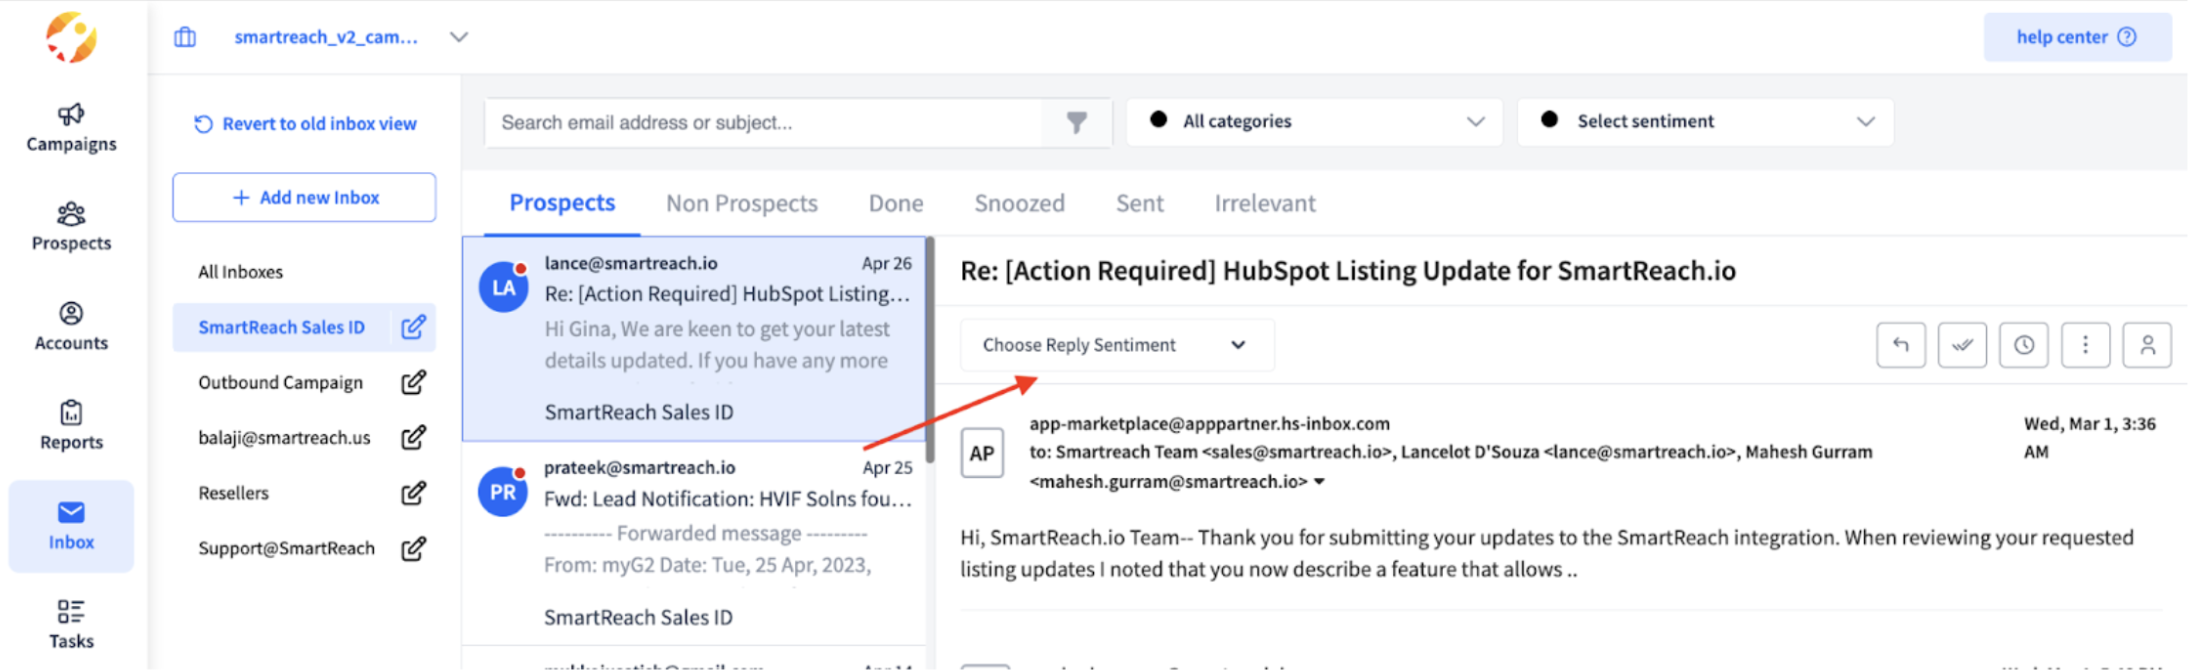 How to stop assigning a reply sentiment using SmartReach